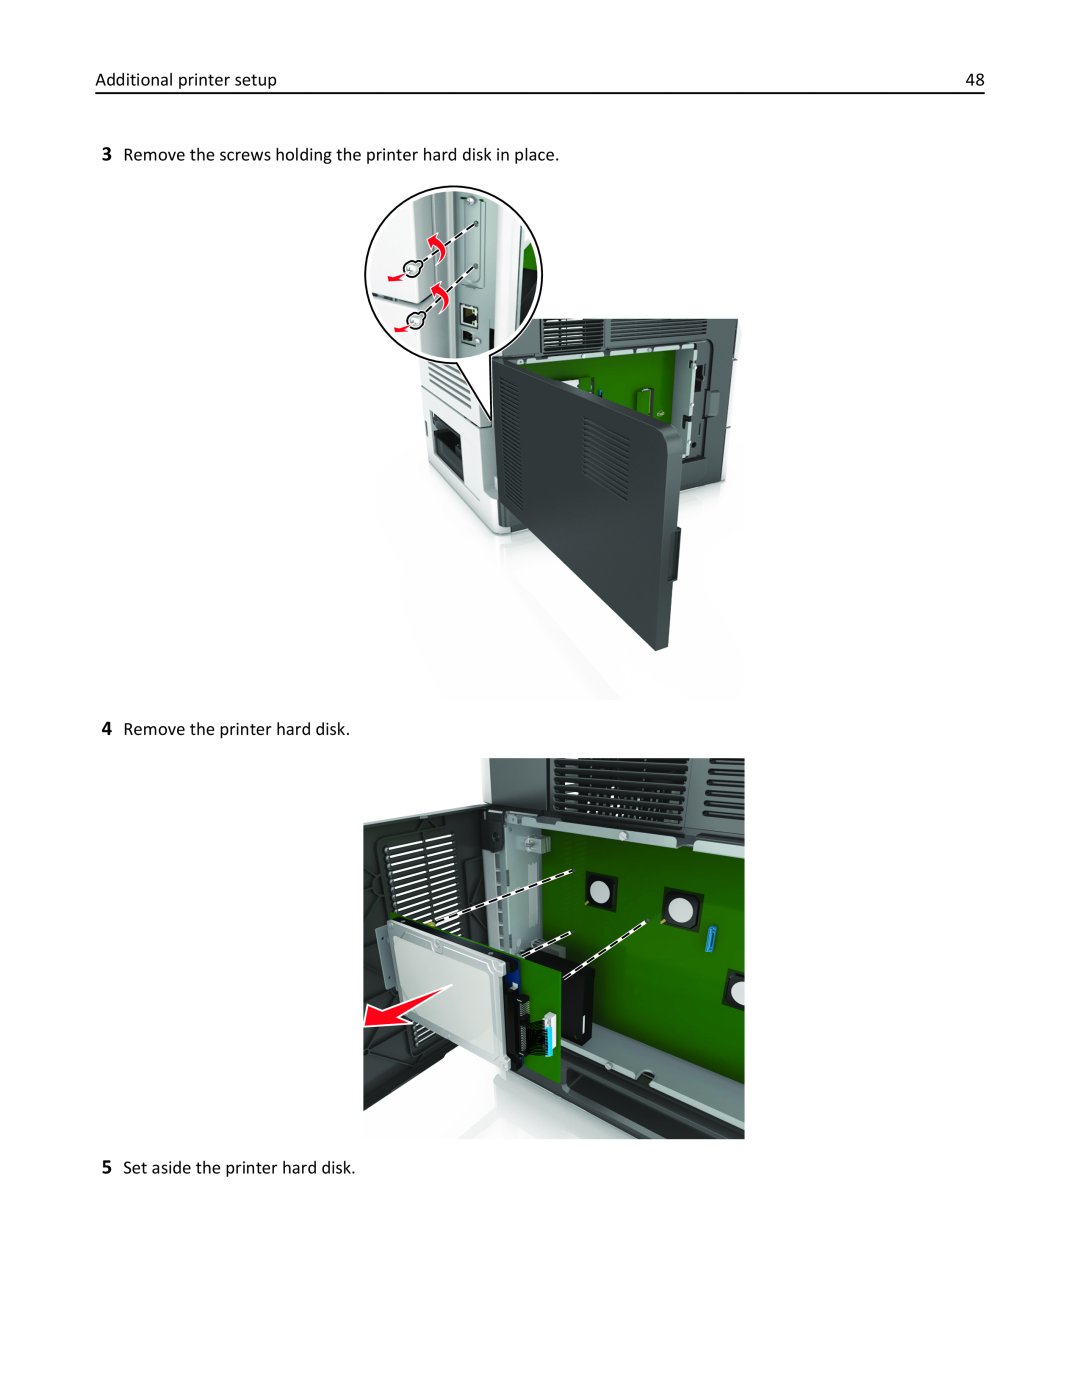 Lexmark 237, MX710DHE, 24T7310, 037 manual Additional printer setup, Remove the screws holding the printer hard disk in place 